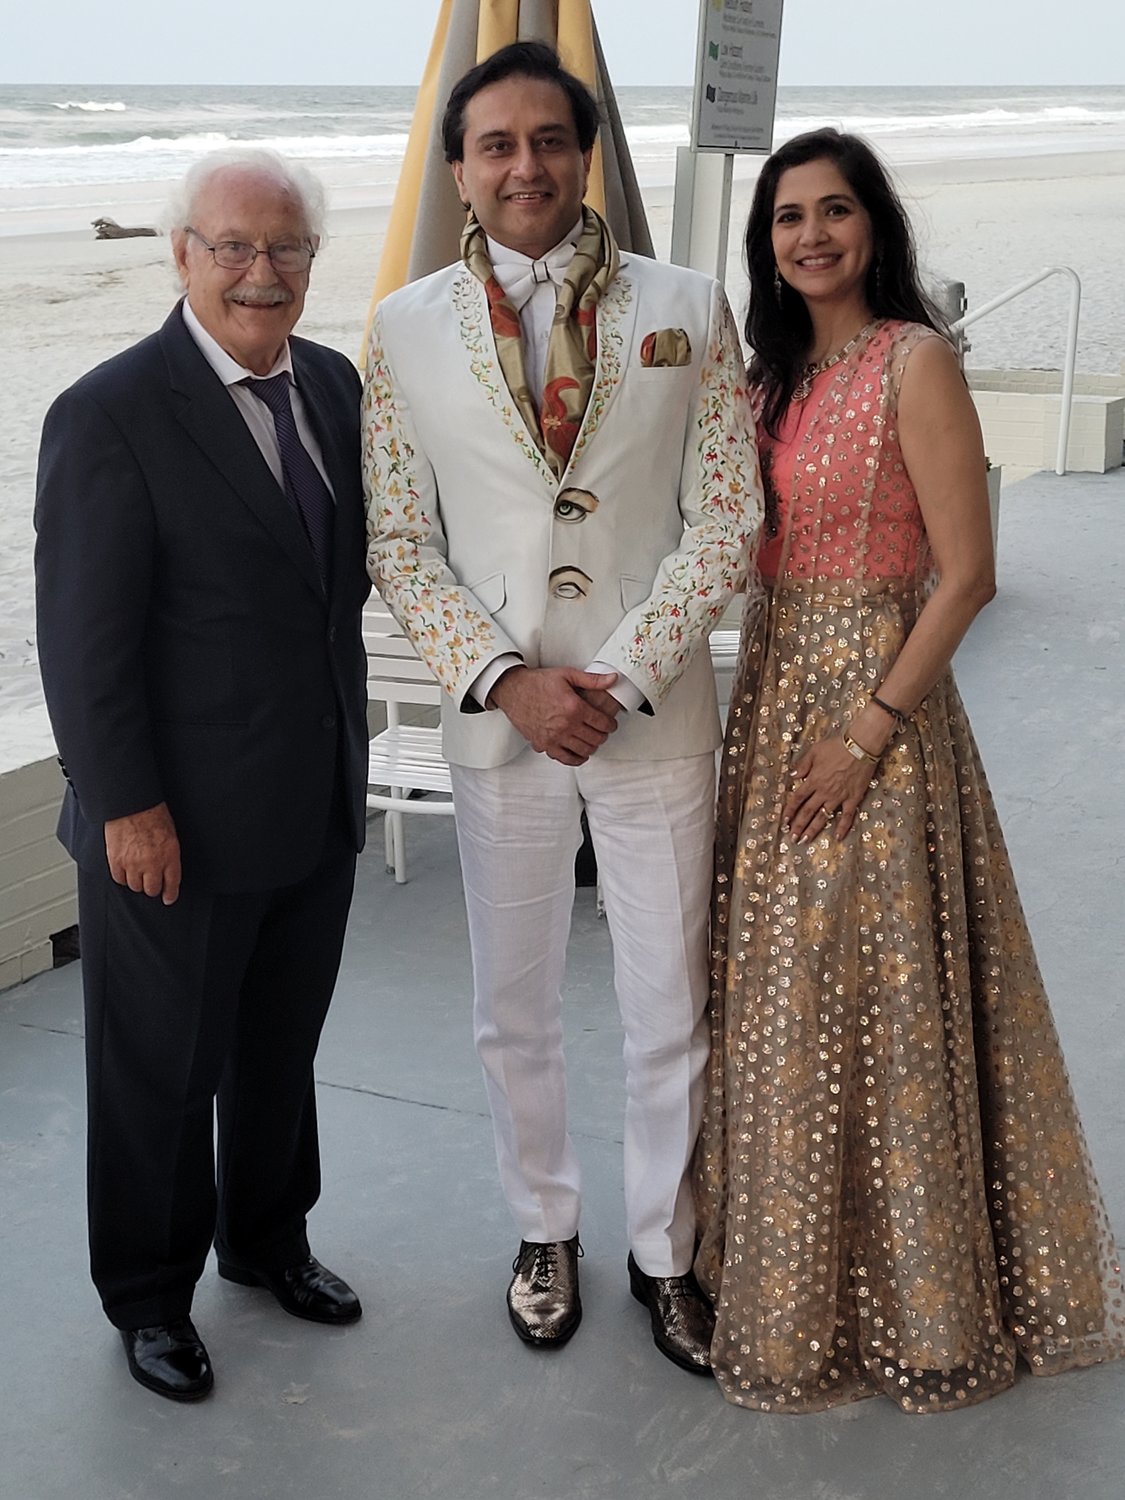 Dr. Arun Gulani, center, wears a suit specially painted by artist Mario Della Penta, left, during the Beaches, A Celebration of the Arts event. At right is Dr. Suparna Gulani.